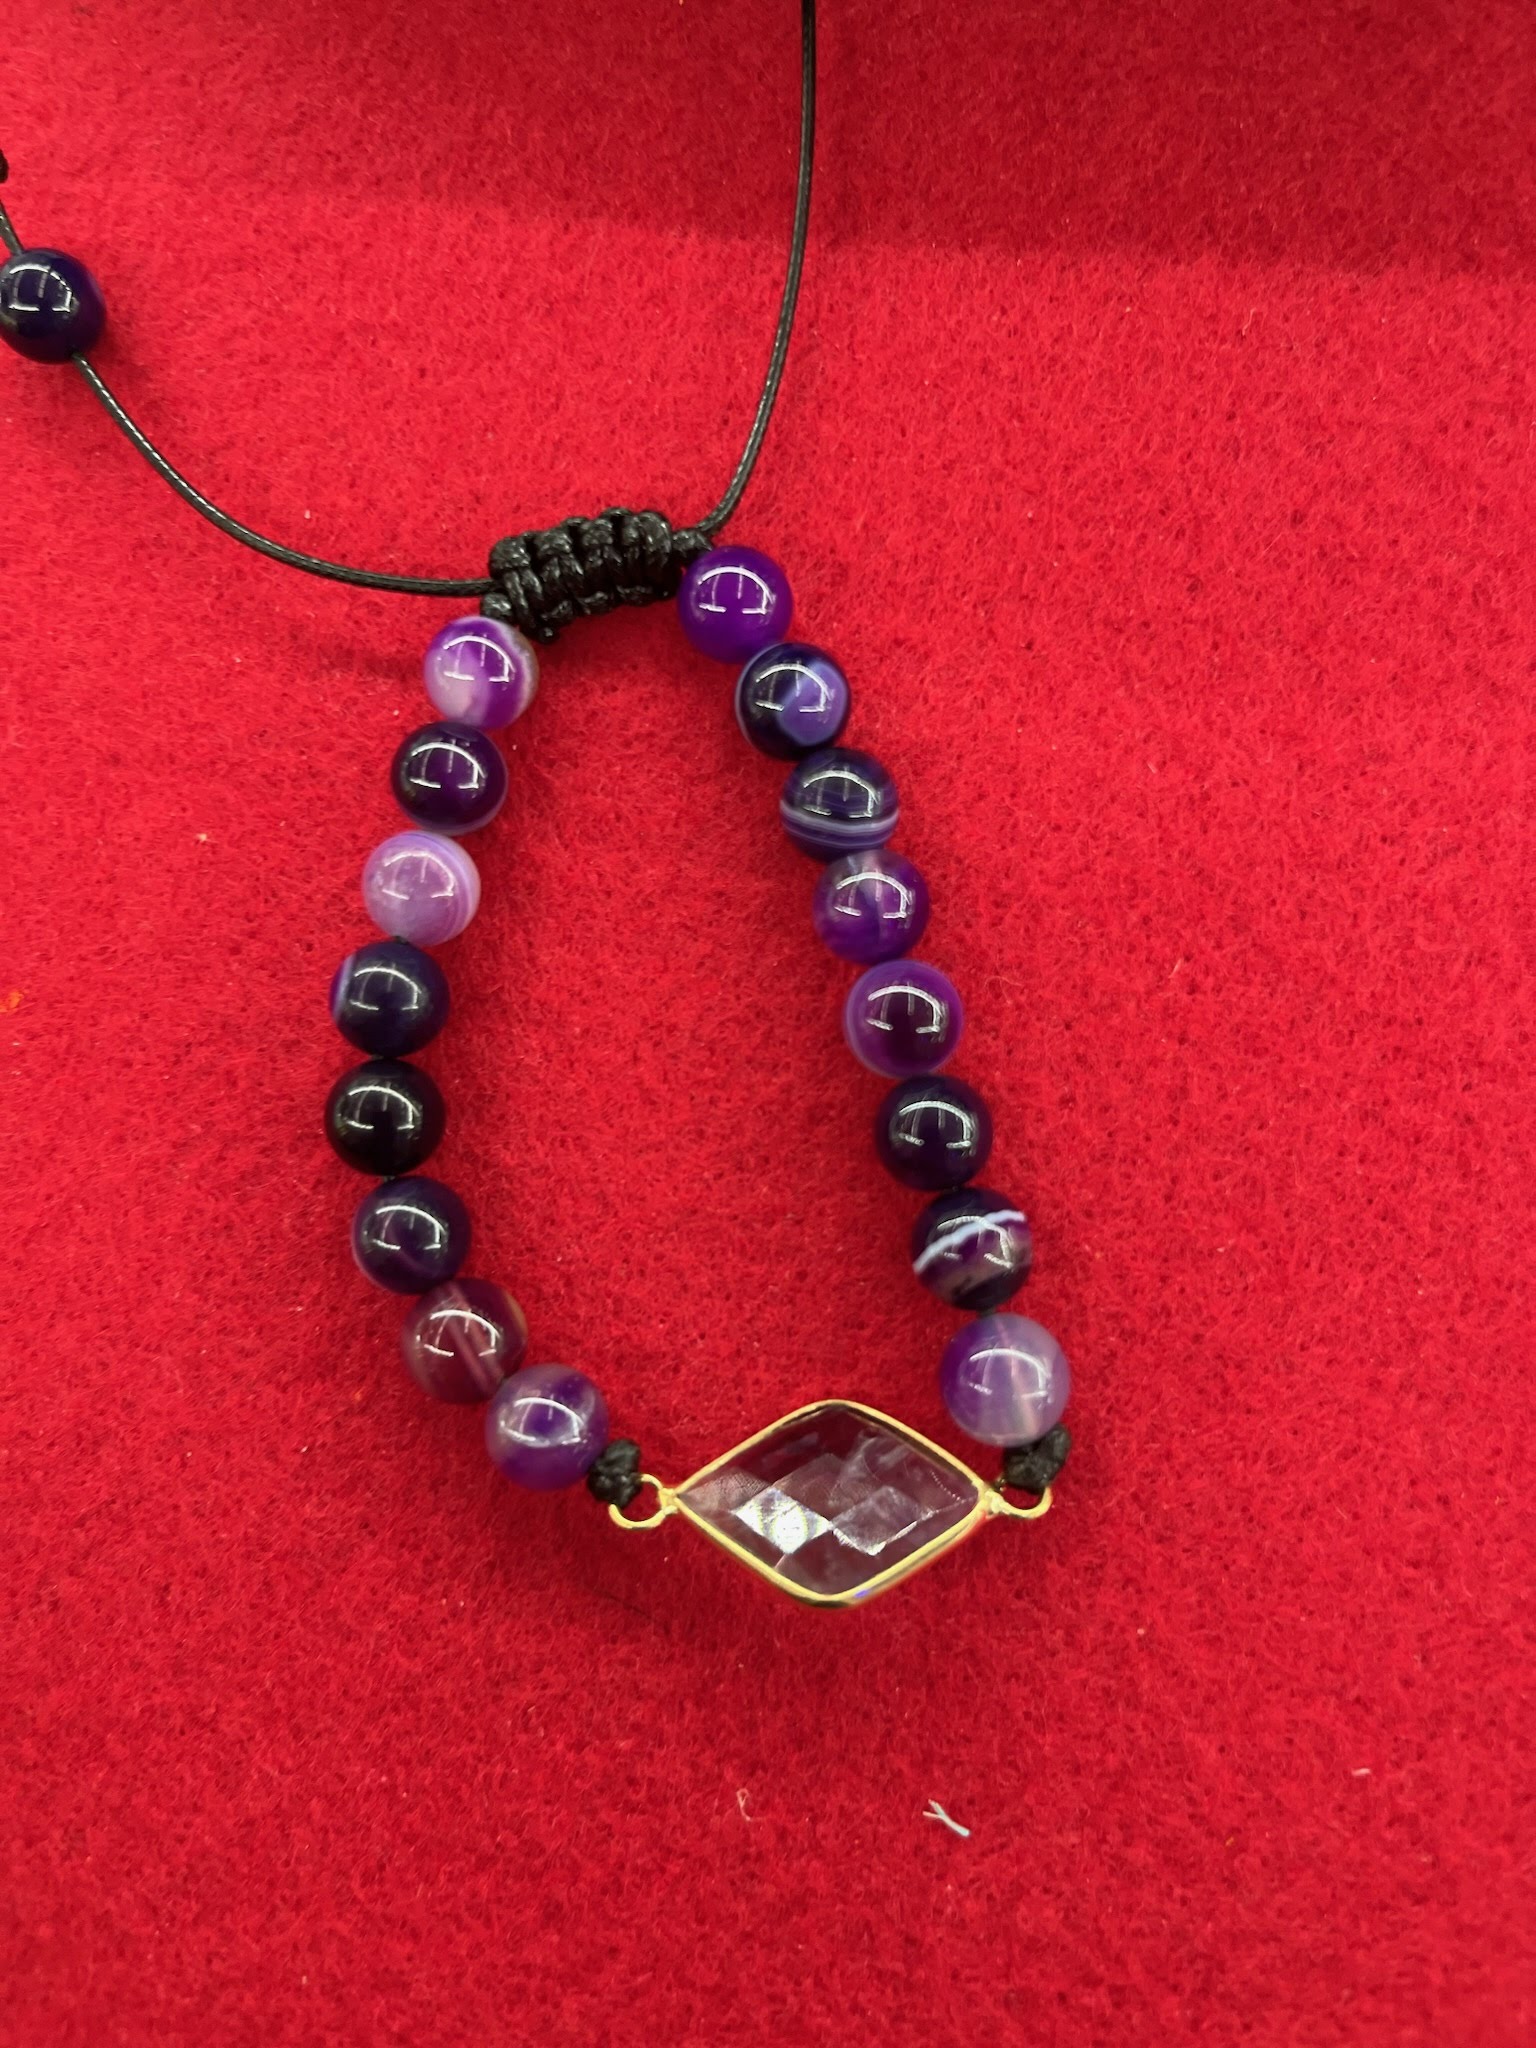 A bracelet with purple and black beads on a red surface